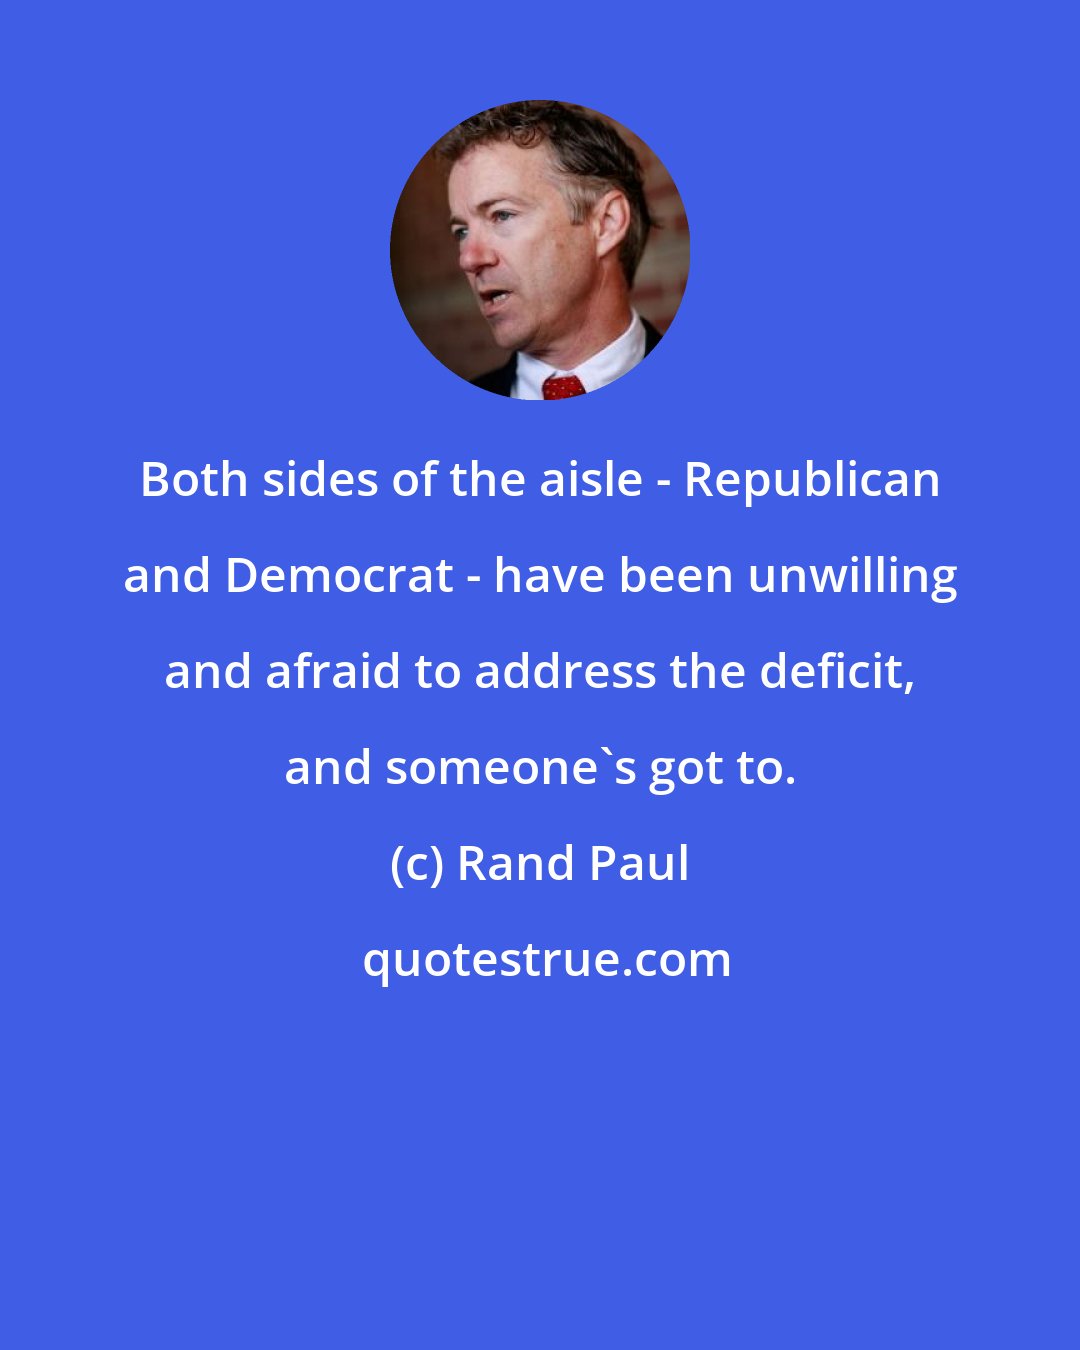 Rand Paul: Both sides of the aisle - Republican and Democrat - have been unwilling and afraid to address the deficit, and someone's got to.